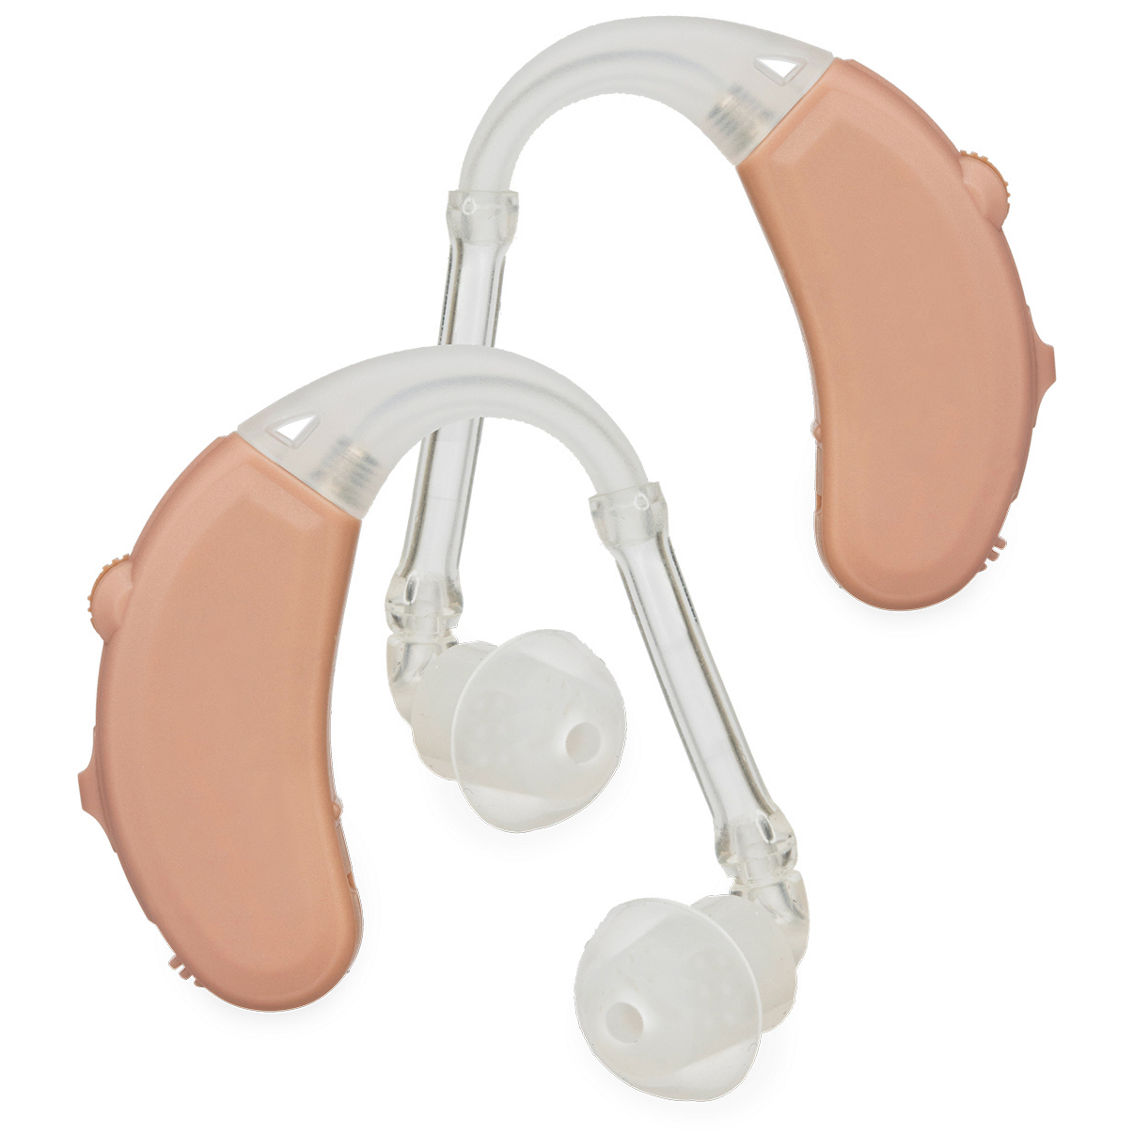 Lucid Hearing Enrich Over The Counter Hearing Aids - Image 1 of 5